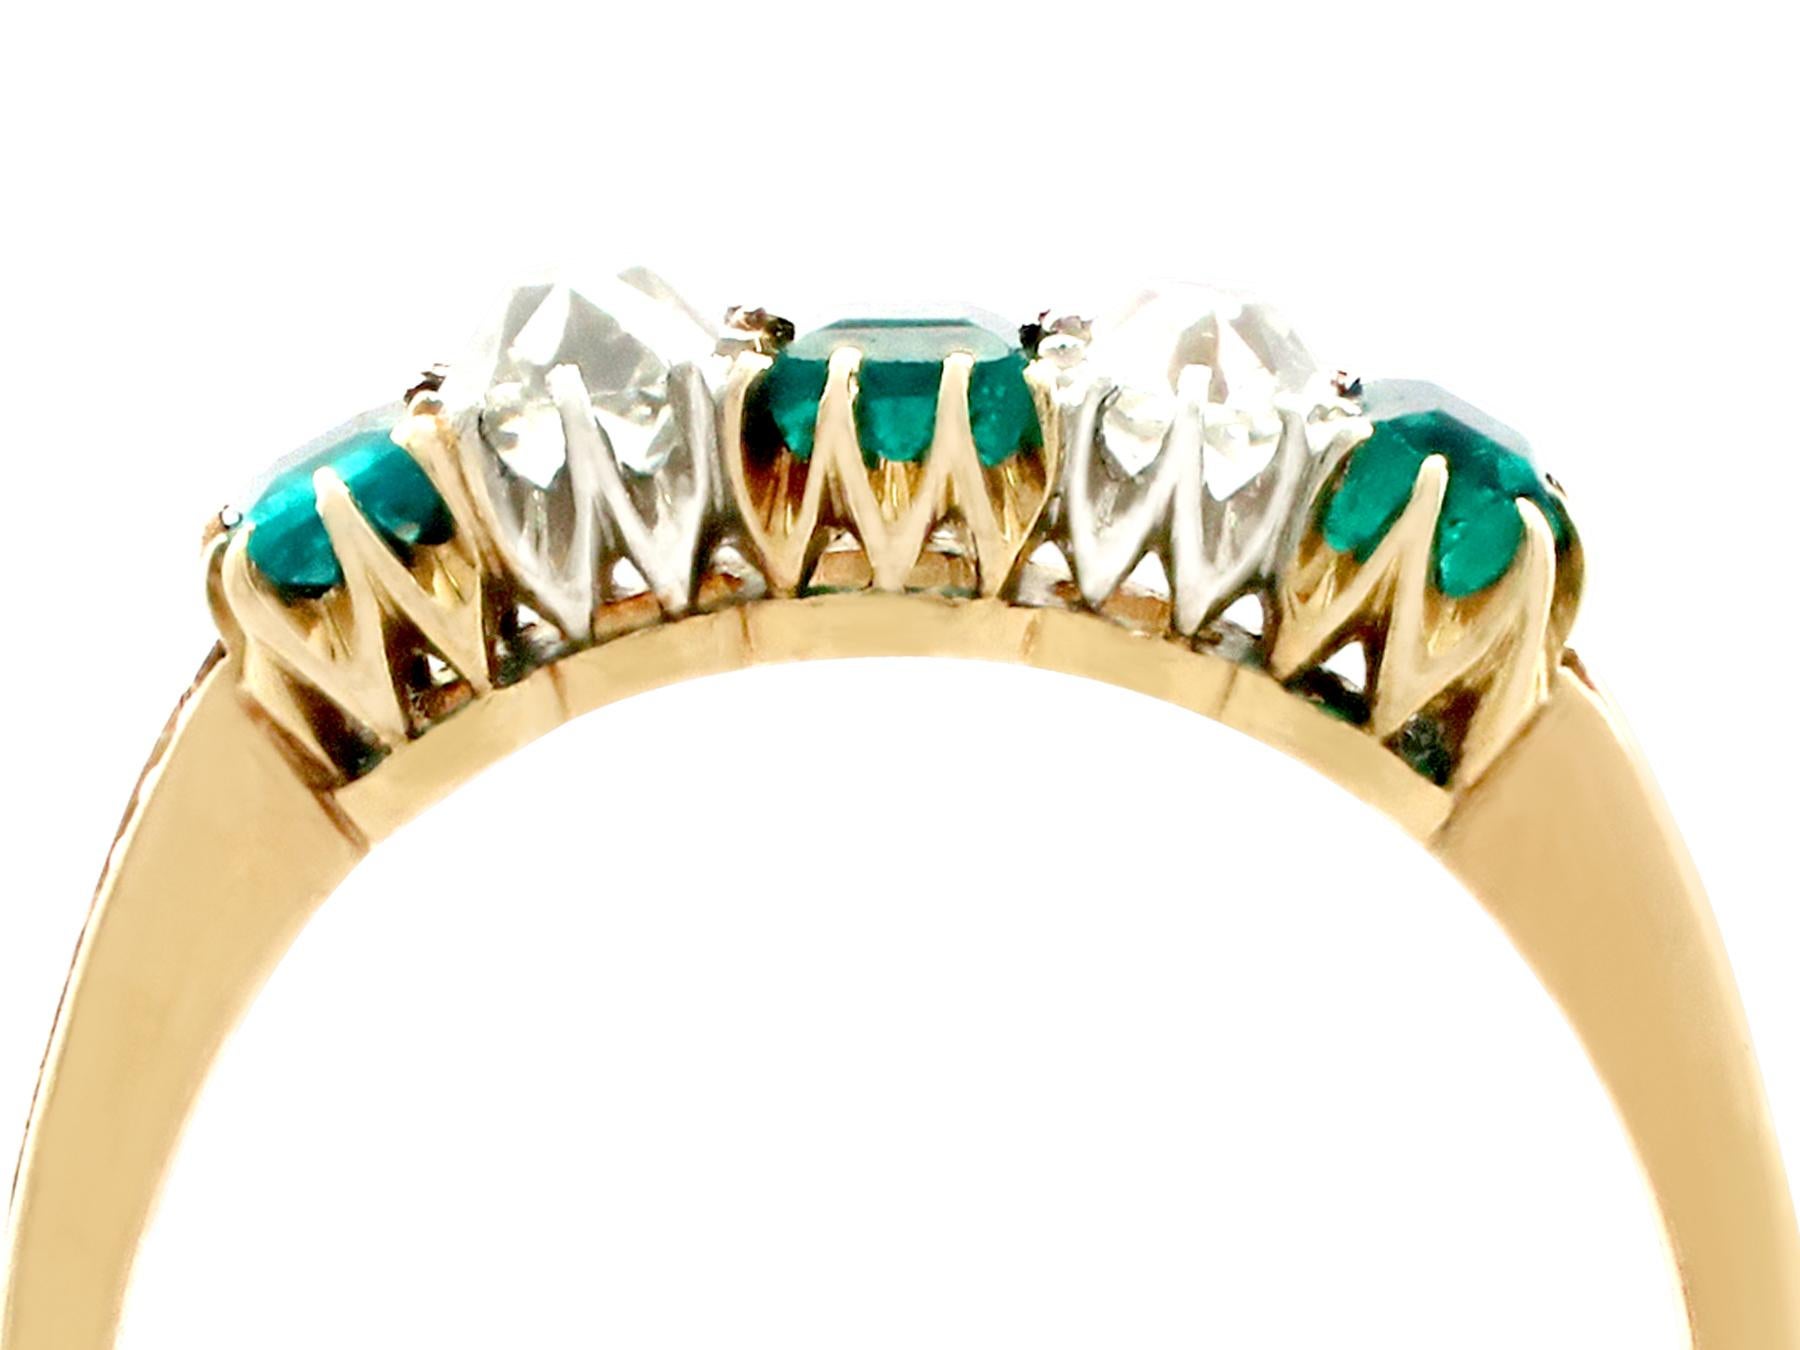 An exceptional, fine and impressive 0.62 carat natural emerald, 0.48 carat diamond, 18 karat yellow gold cocktail ring; part of our antique, vintage jewellery and estate jewelry collections.

This exception, fine and impressive antique emerald and